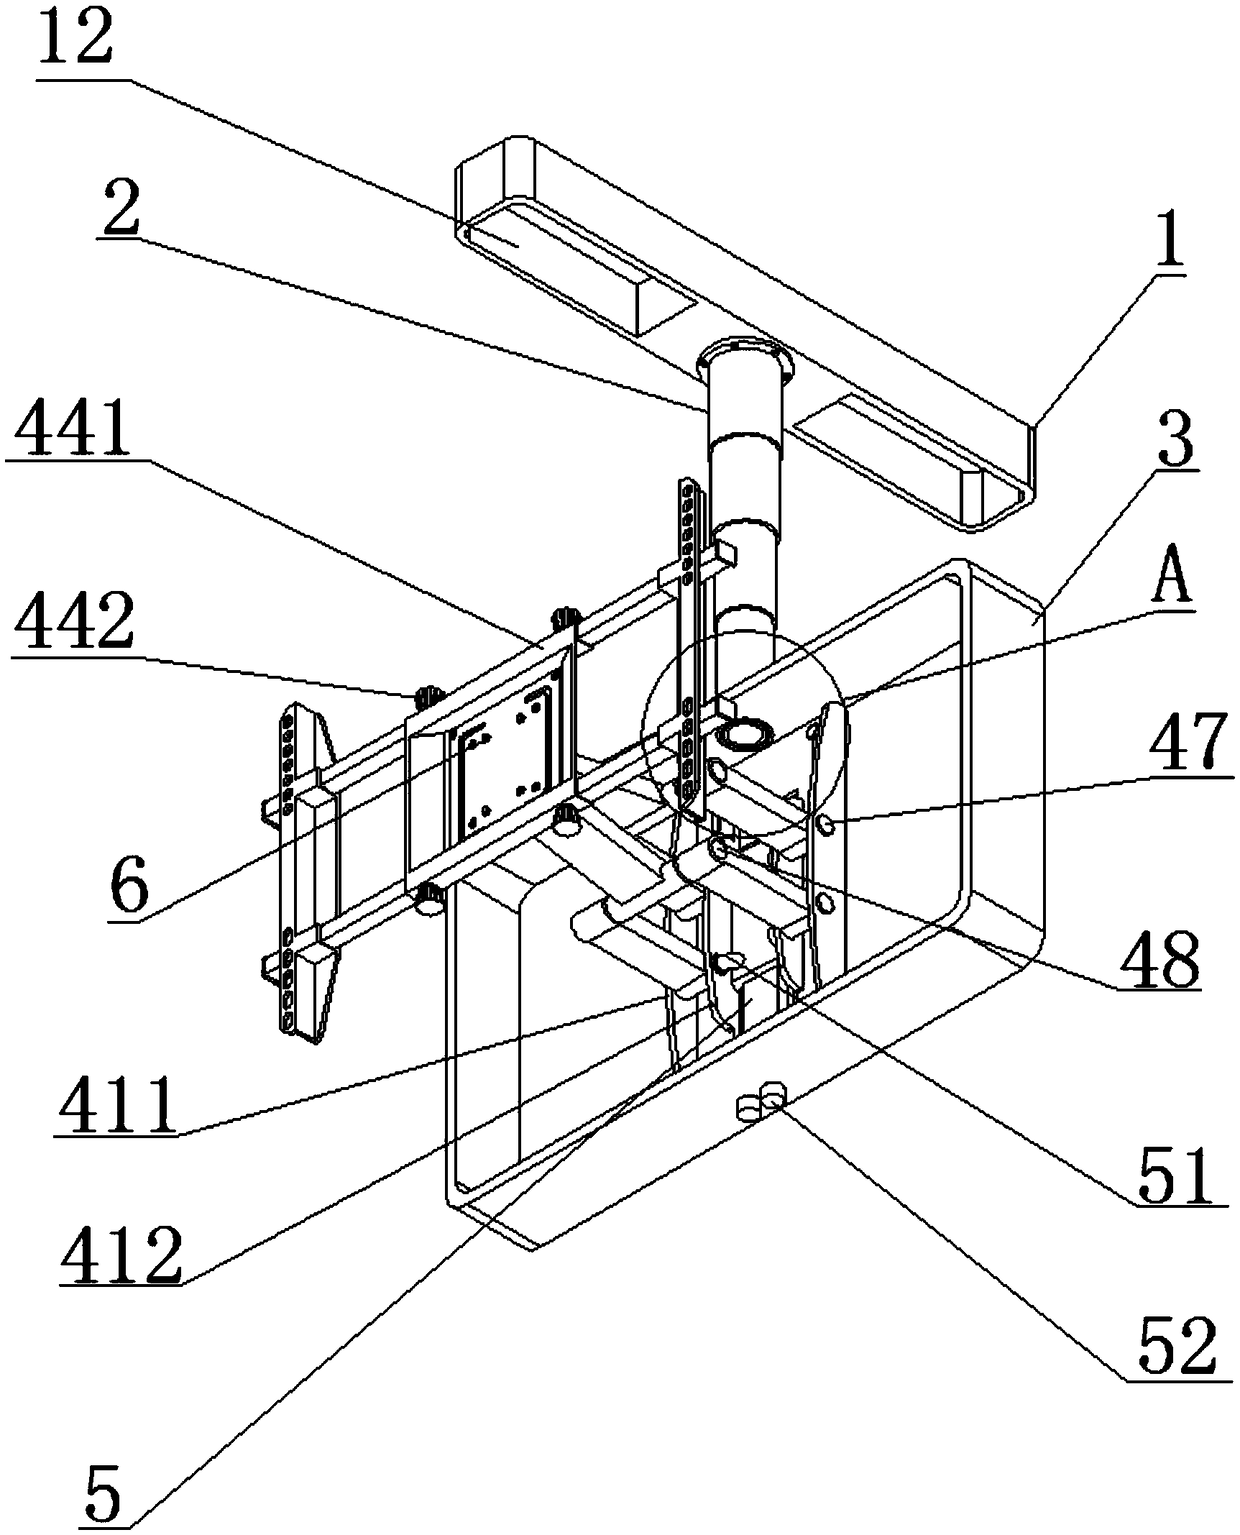 Multidirectional suspending rack used for display screen of medical angiography X-ray machine